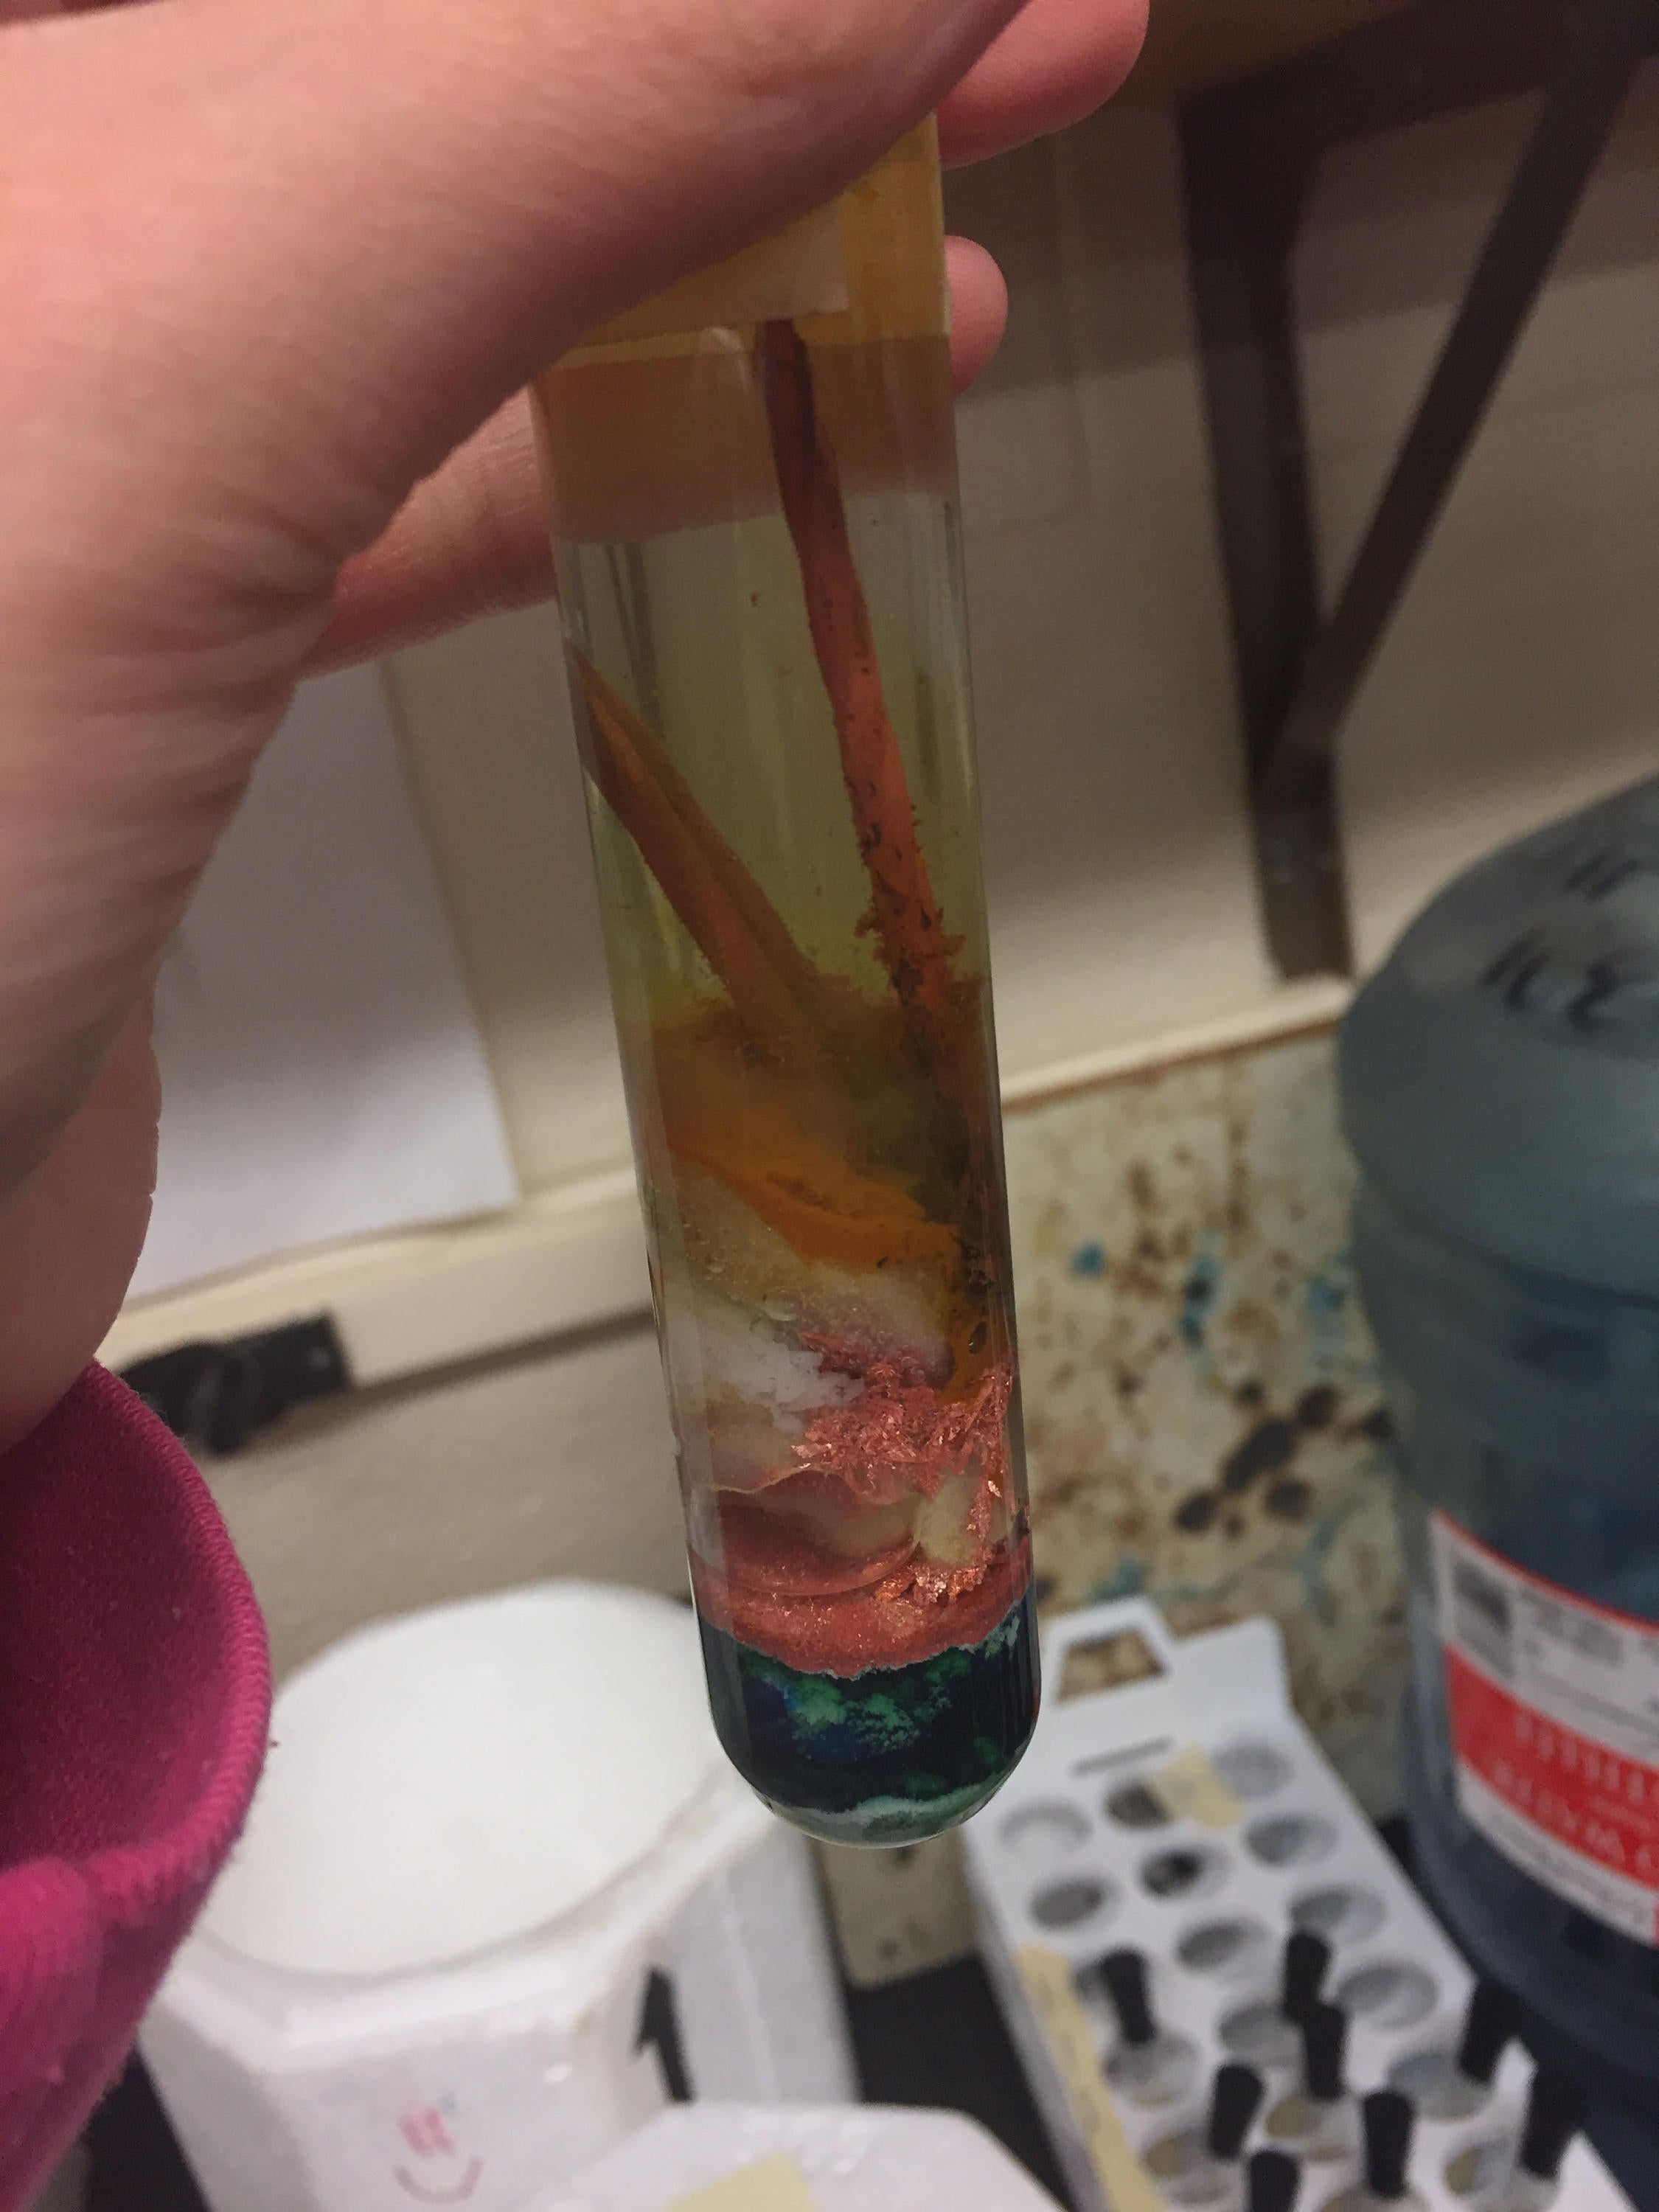 Three layers in a test tube with a bottom dark green layer, a copper coloured middle layer and a brownish cloudy solutions with two nails  not present